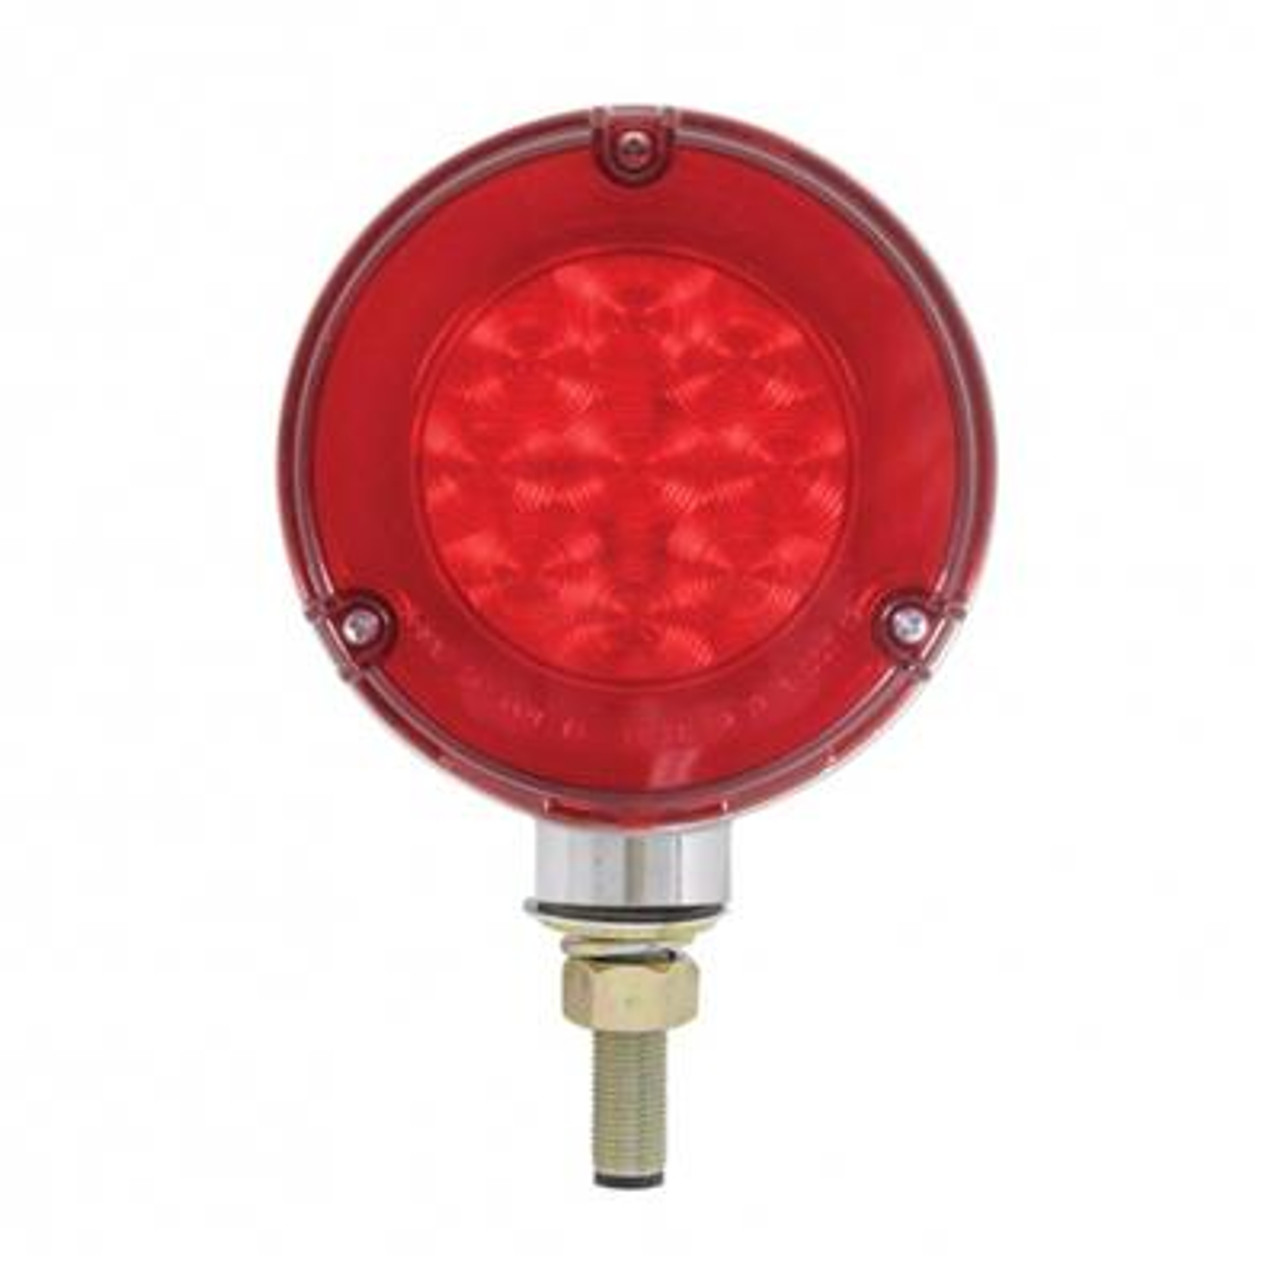 54 LED Single Stud Double Face GloLight (Turn Signal) - Amber & Red LED/Amber & Red Lens